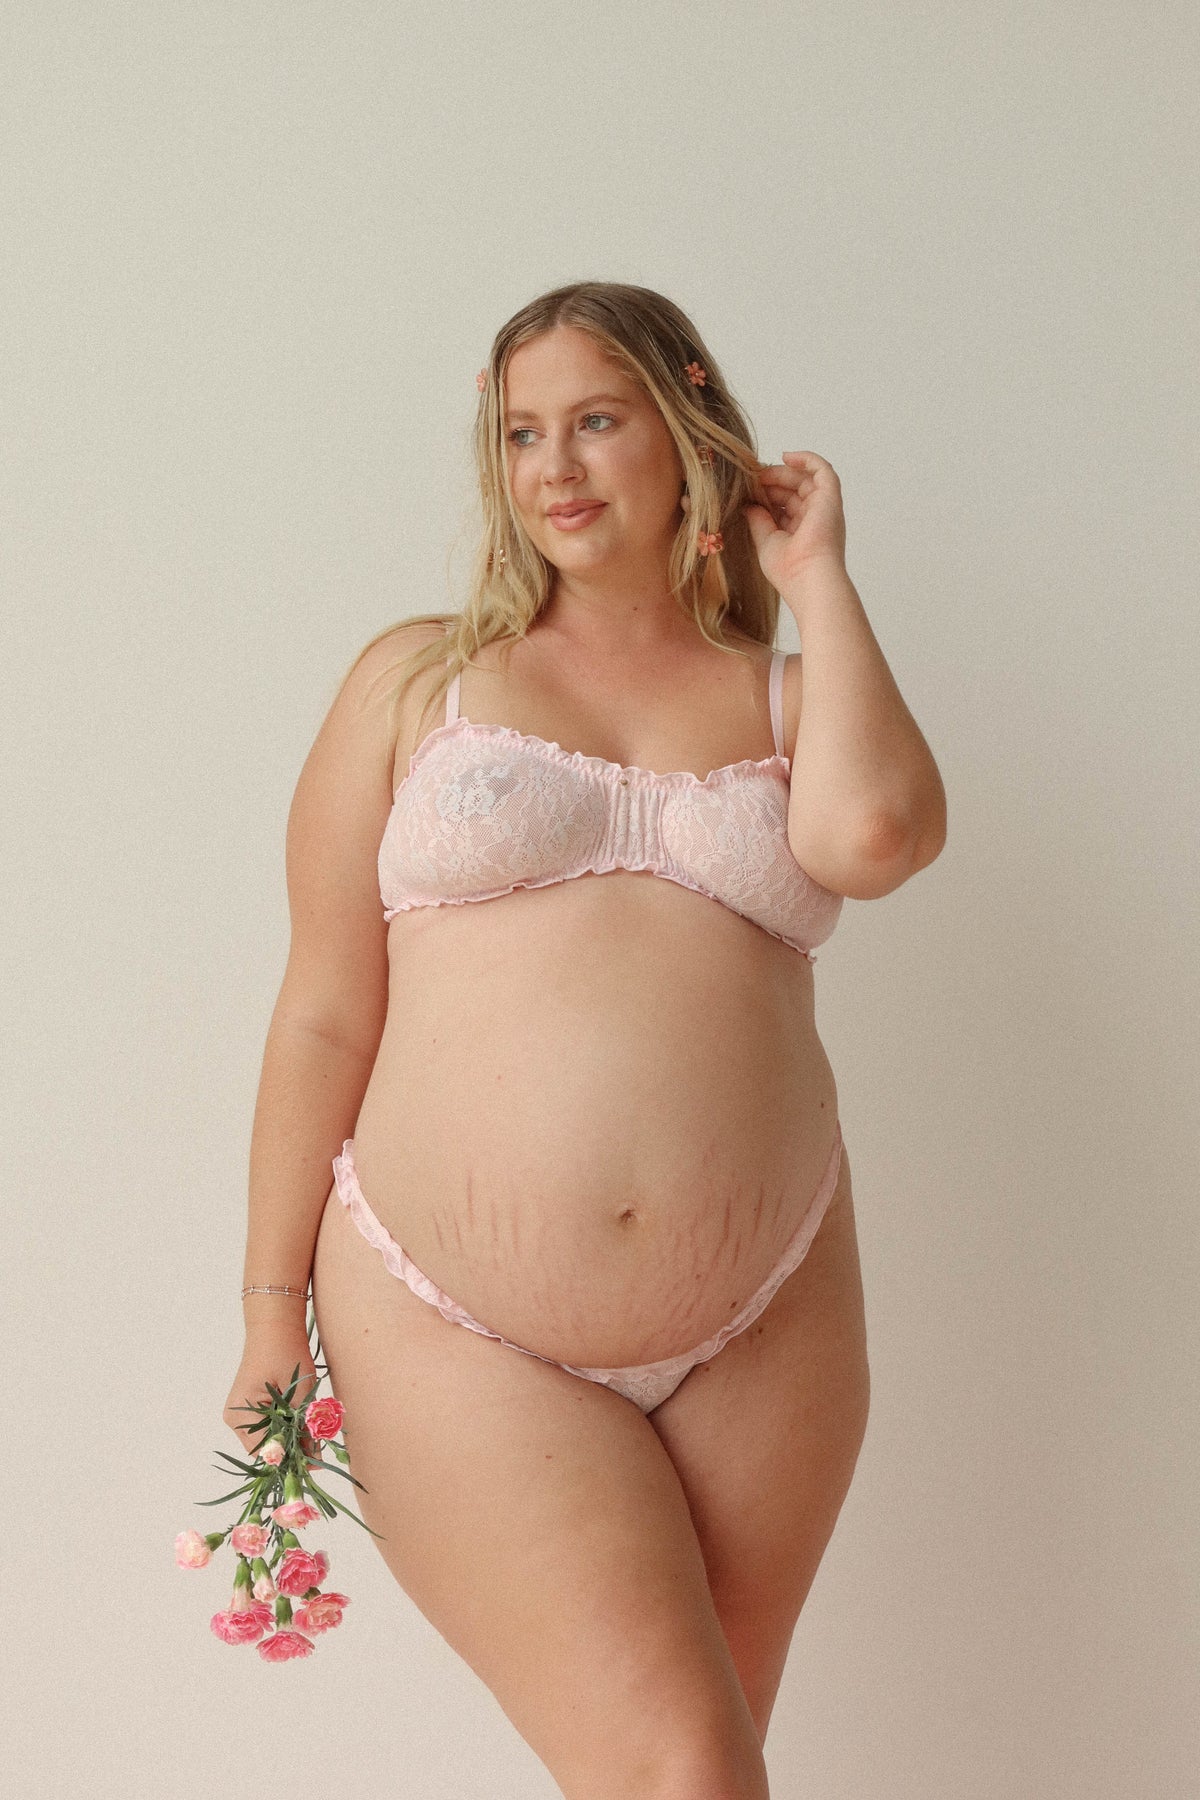 Chelsea lace Bra - Baby pink